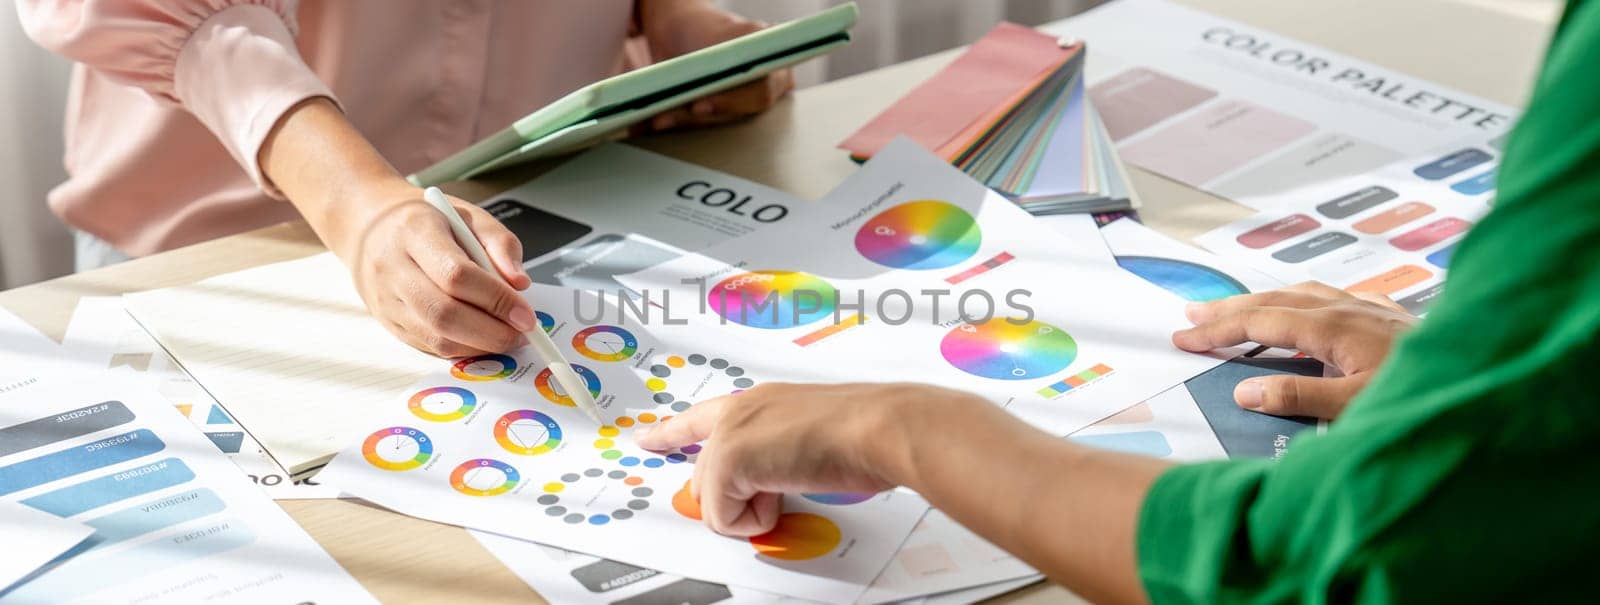 Skilled architect searching data from tablet while selecting an appropriate color from color wheel at table with color palette and document scatter around. Creative design concept. Variegated.